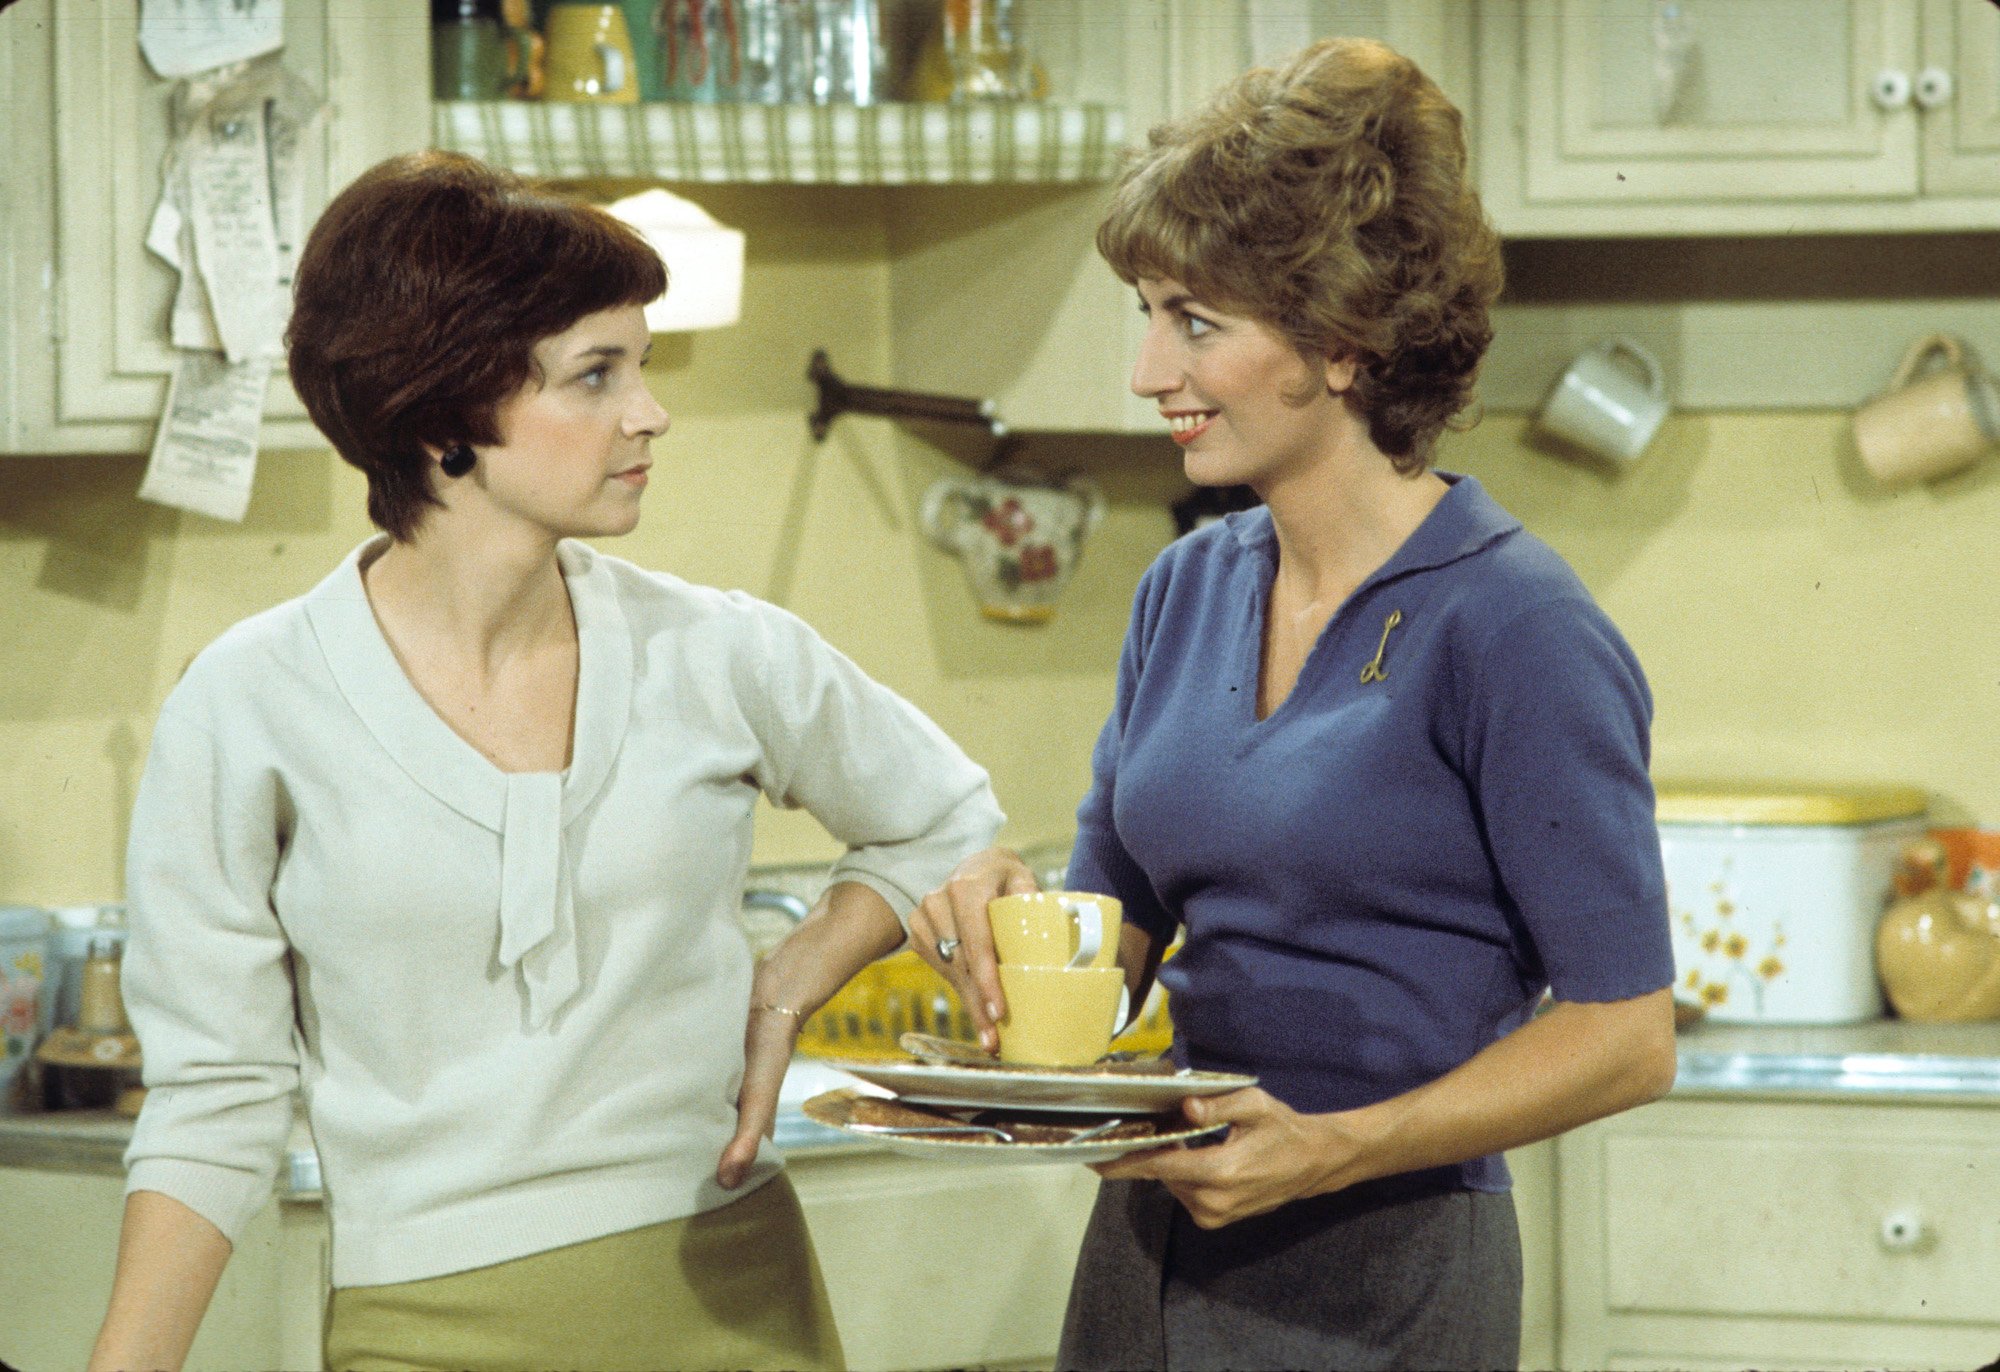 (L-R) Cindy Williams and Penny Marshall smiling, standing in a kitchen